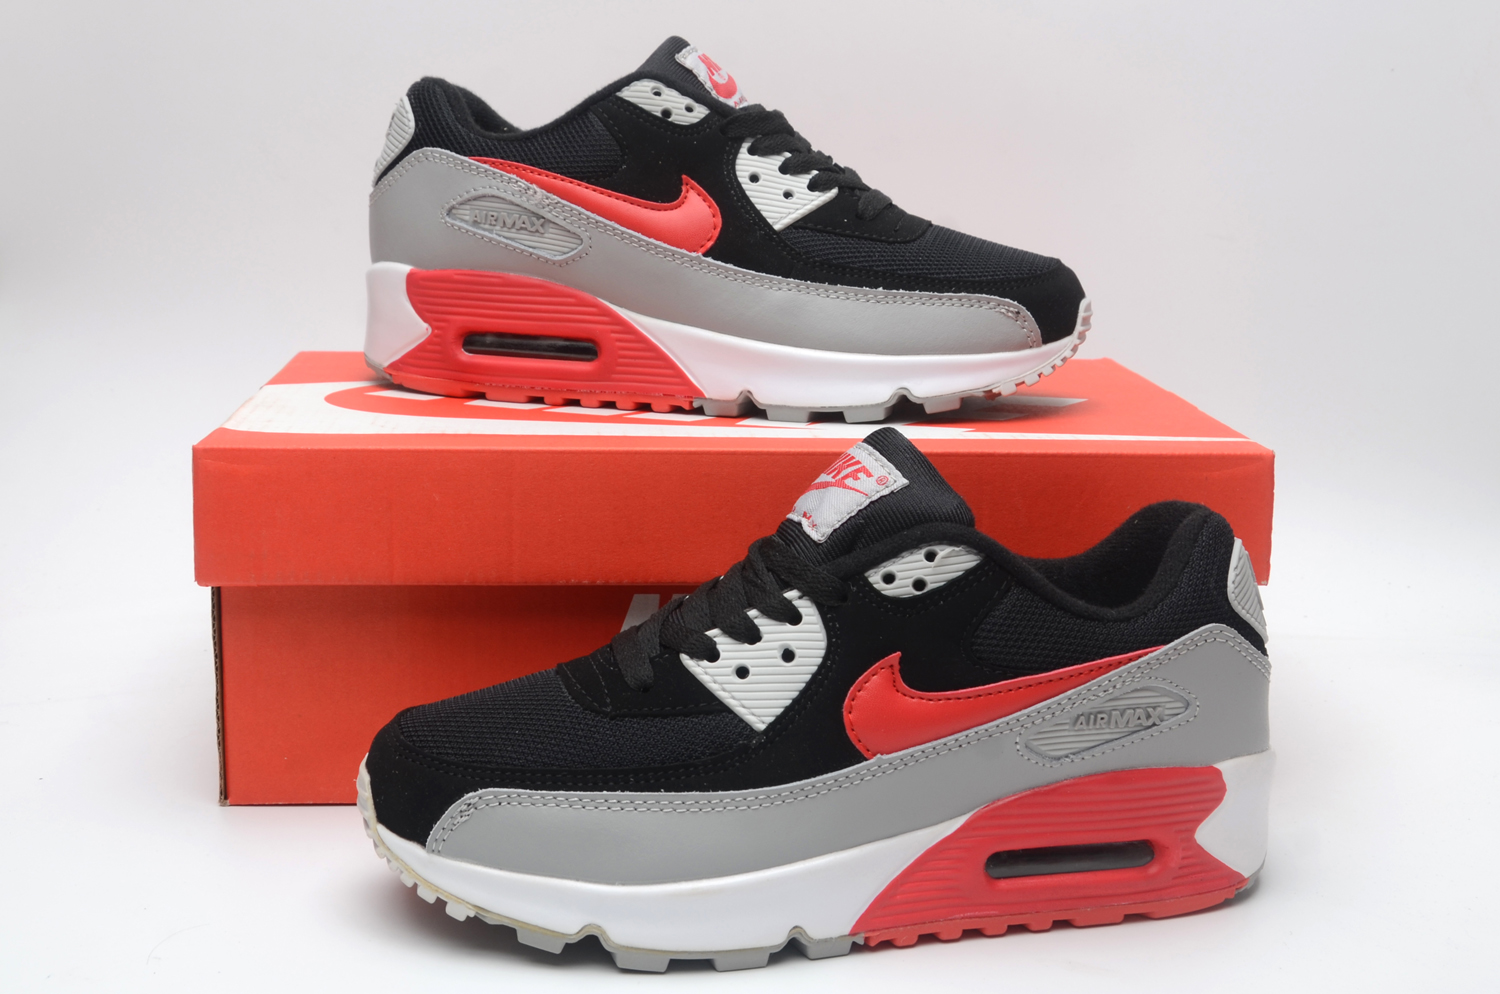 Men's Running weapon Air Max 90 Shoes 051